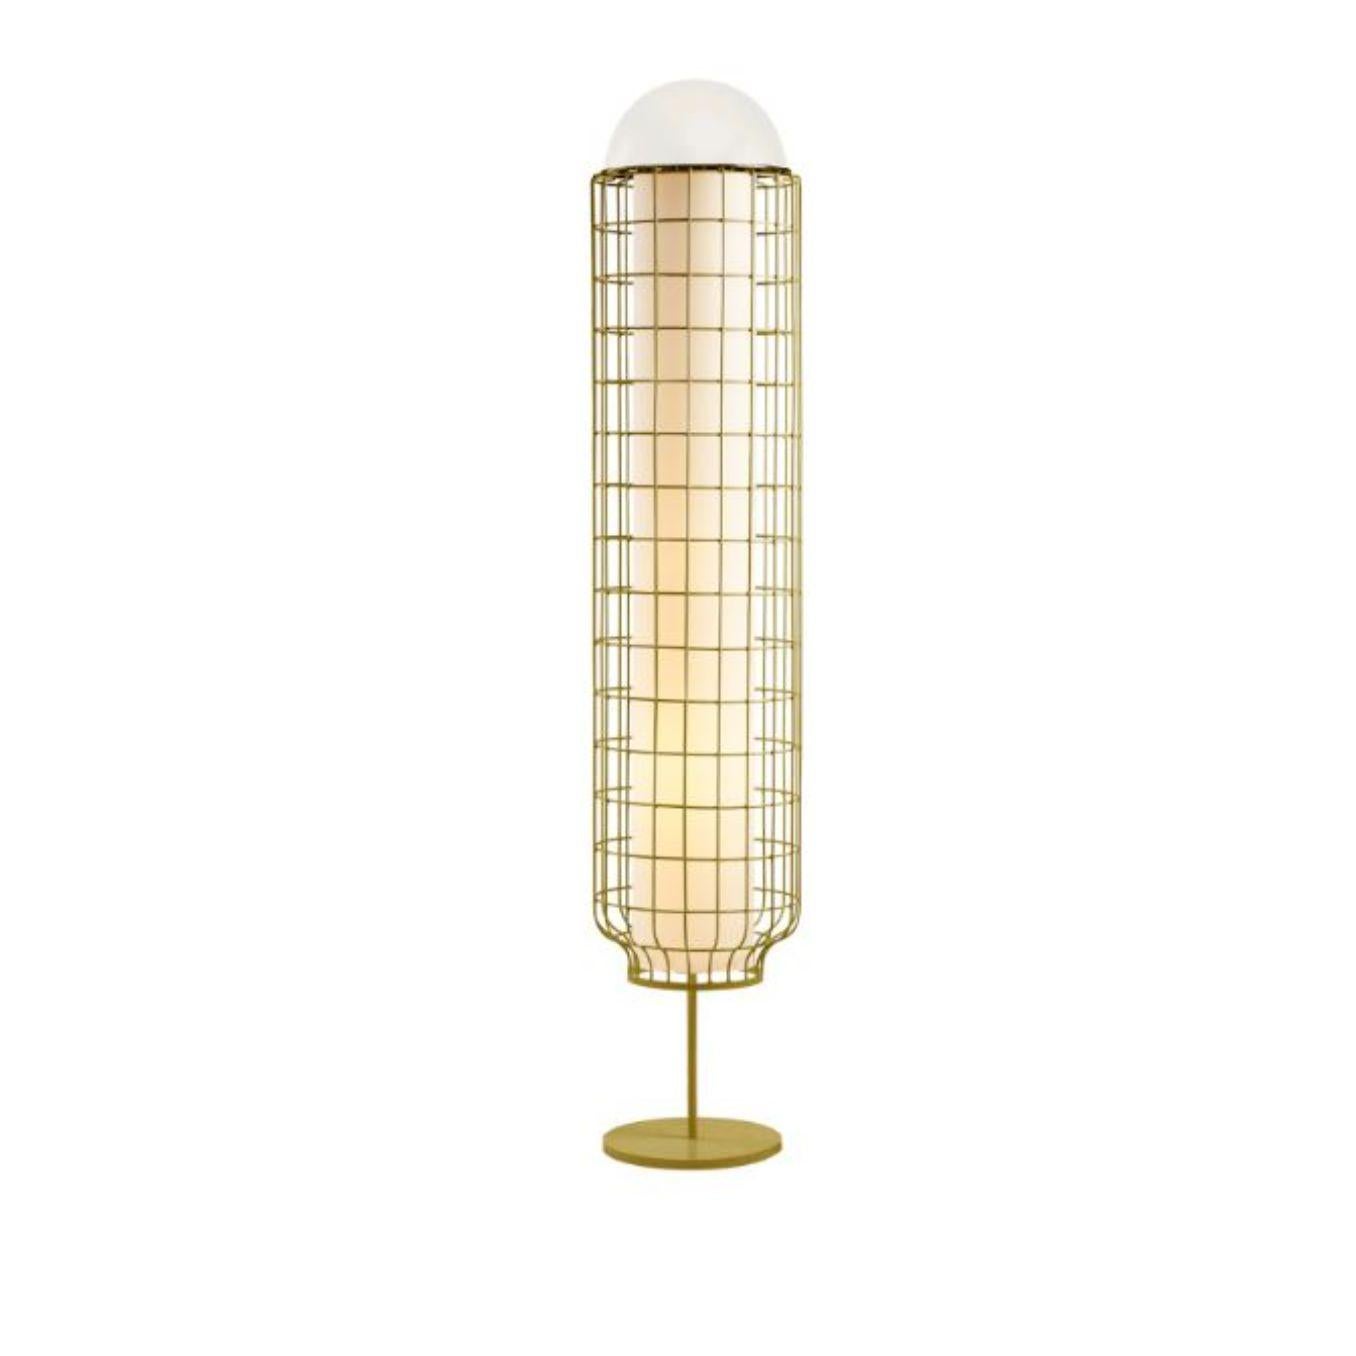 Ivory Magnolia floor lamp by Dooq
Dimensions: W 37 x D 37 x H 170 cm
Materials: lacquered metal, polished or brushed metal.
abat-jour: cotton
Also available in different colours and materials.

Information:
230V/50Hz
E27/2x20W